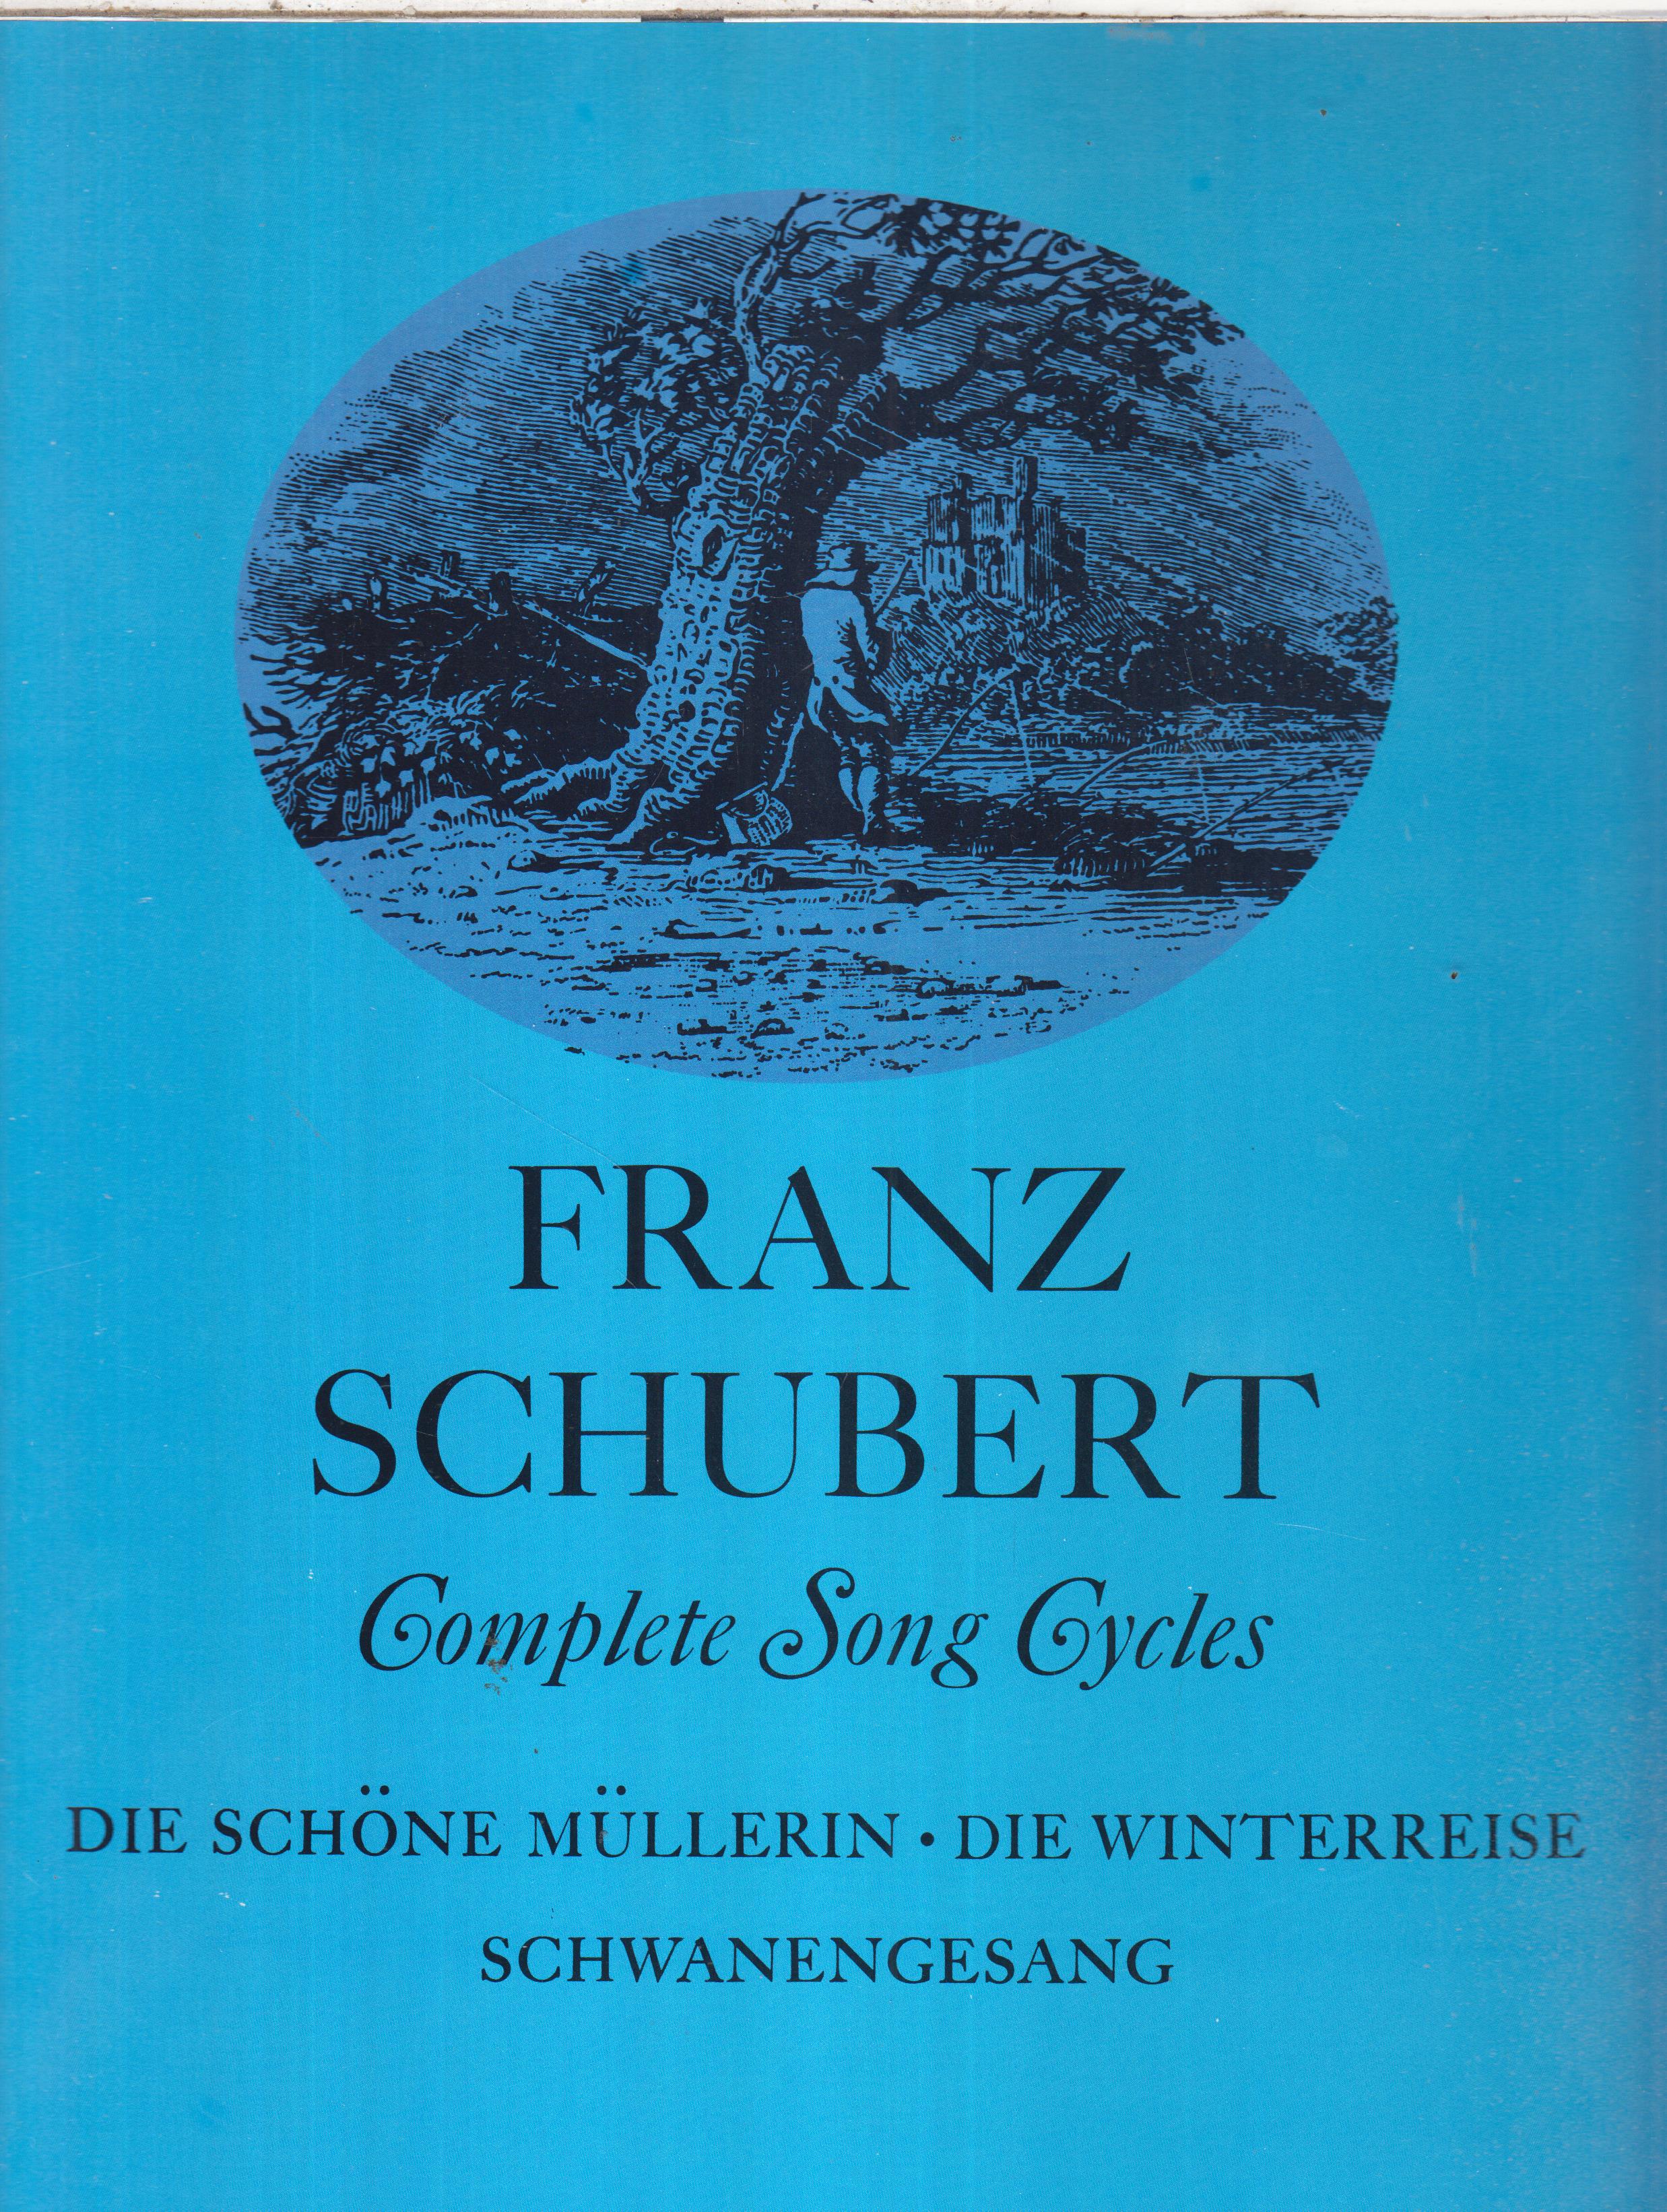 FRANZ SCHUBERT Complete Songs Cycles